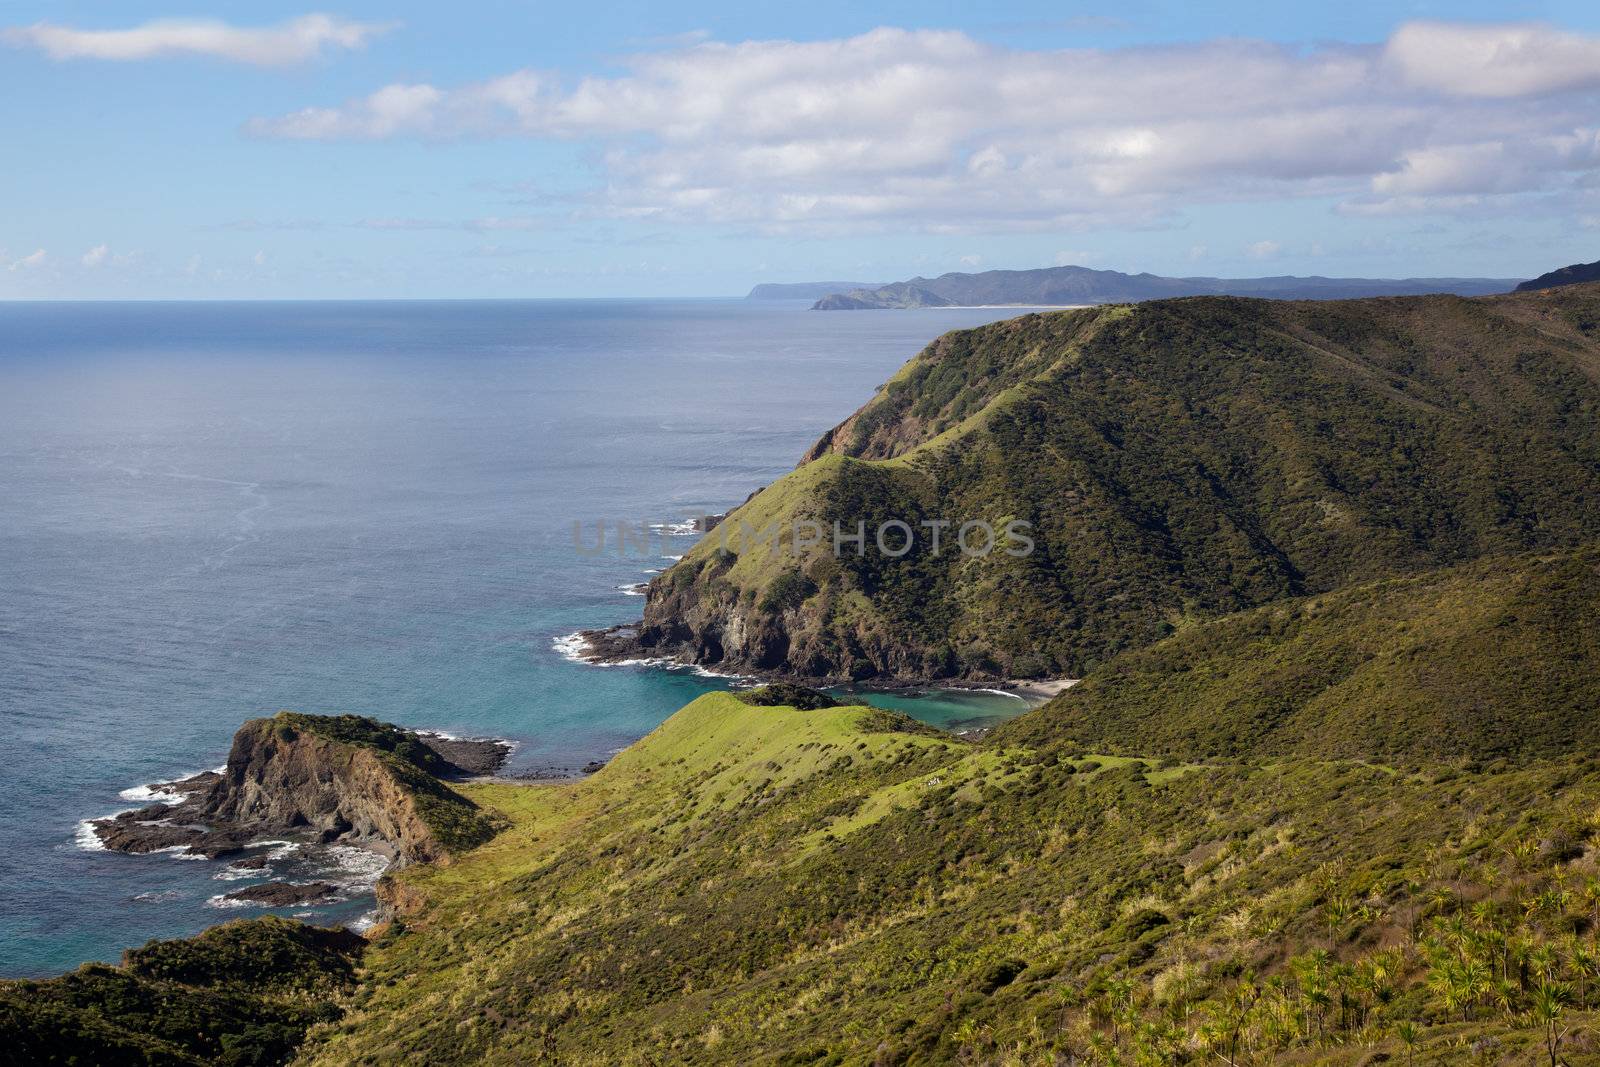 A small cove near Cape Reinga, the northernmost tip of New Zealand.